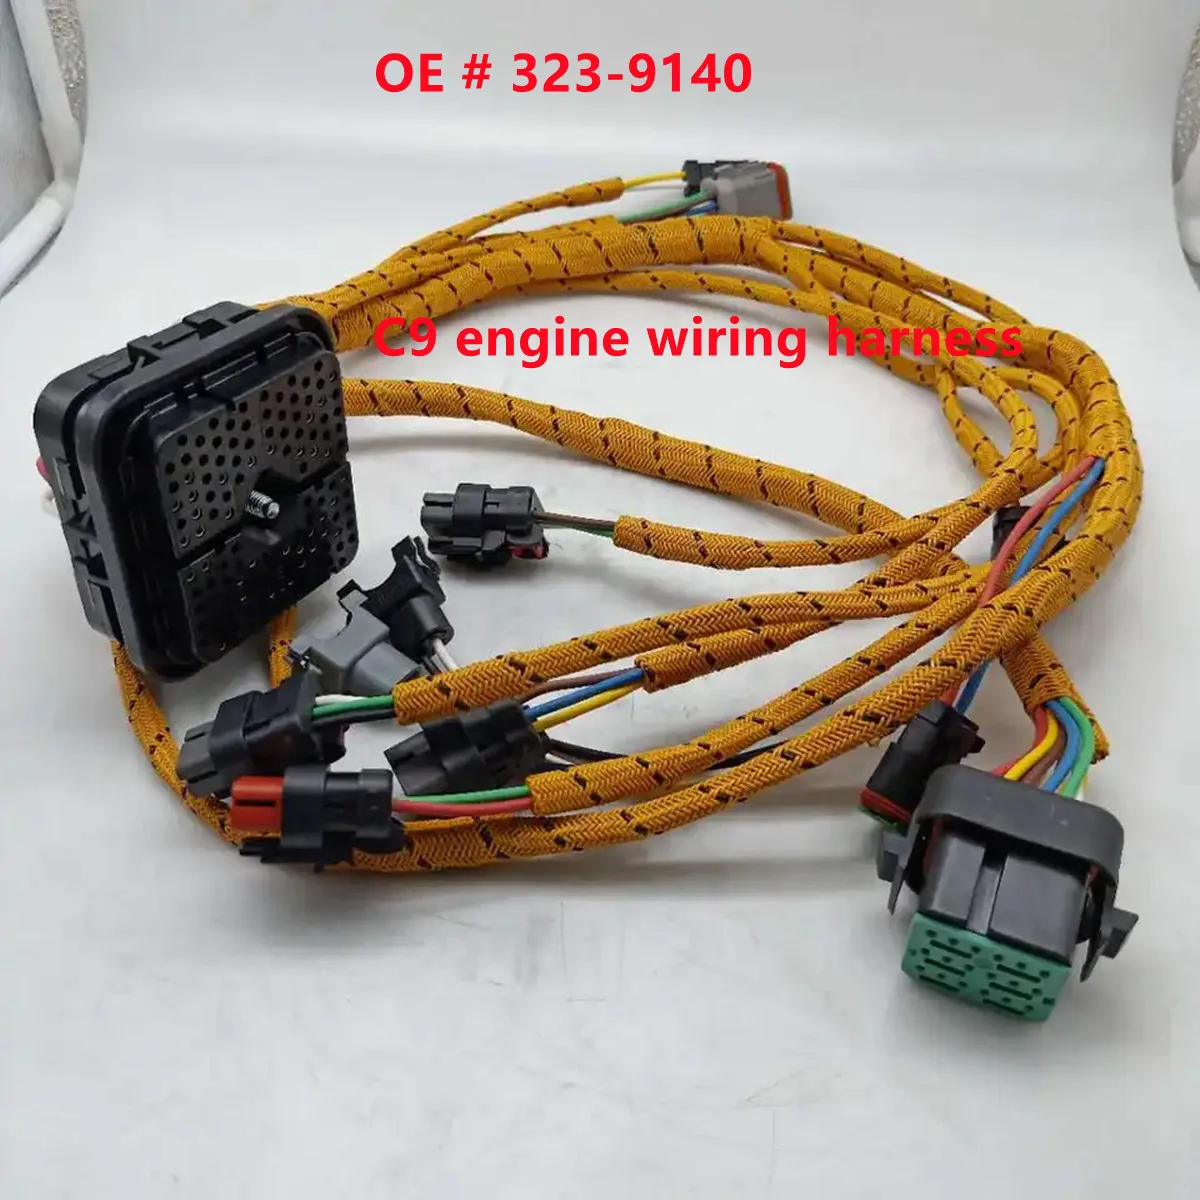 323-9140 3239140  New Engine Wiring Harness for CAT Excavator 330D/336D C9 Engin - £362.17 GBP